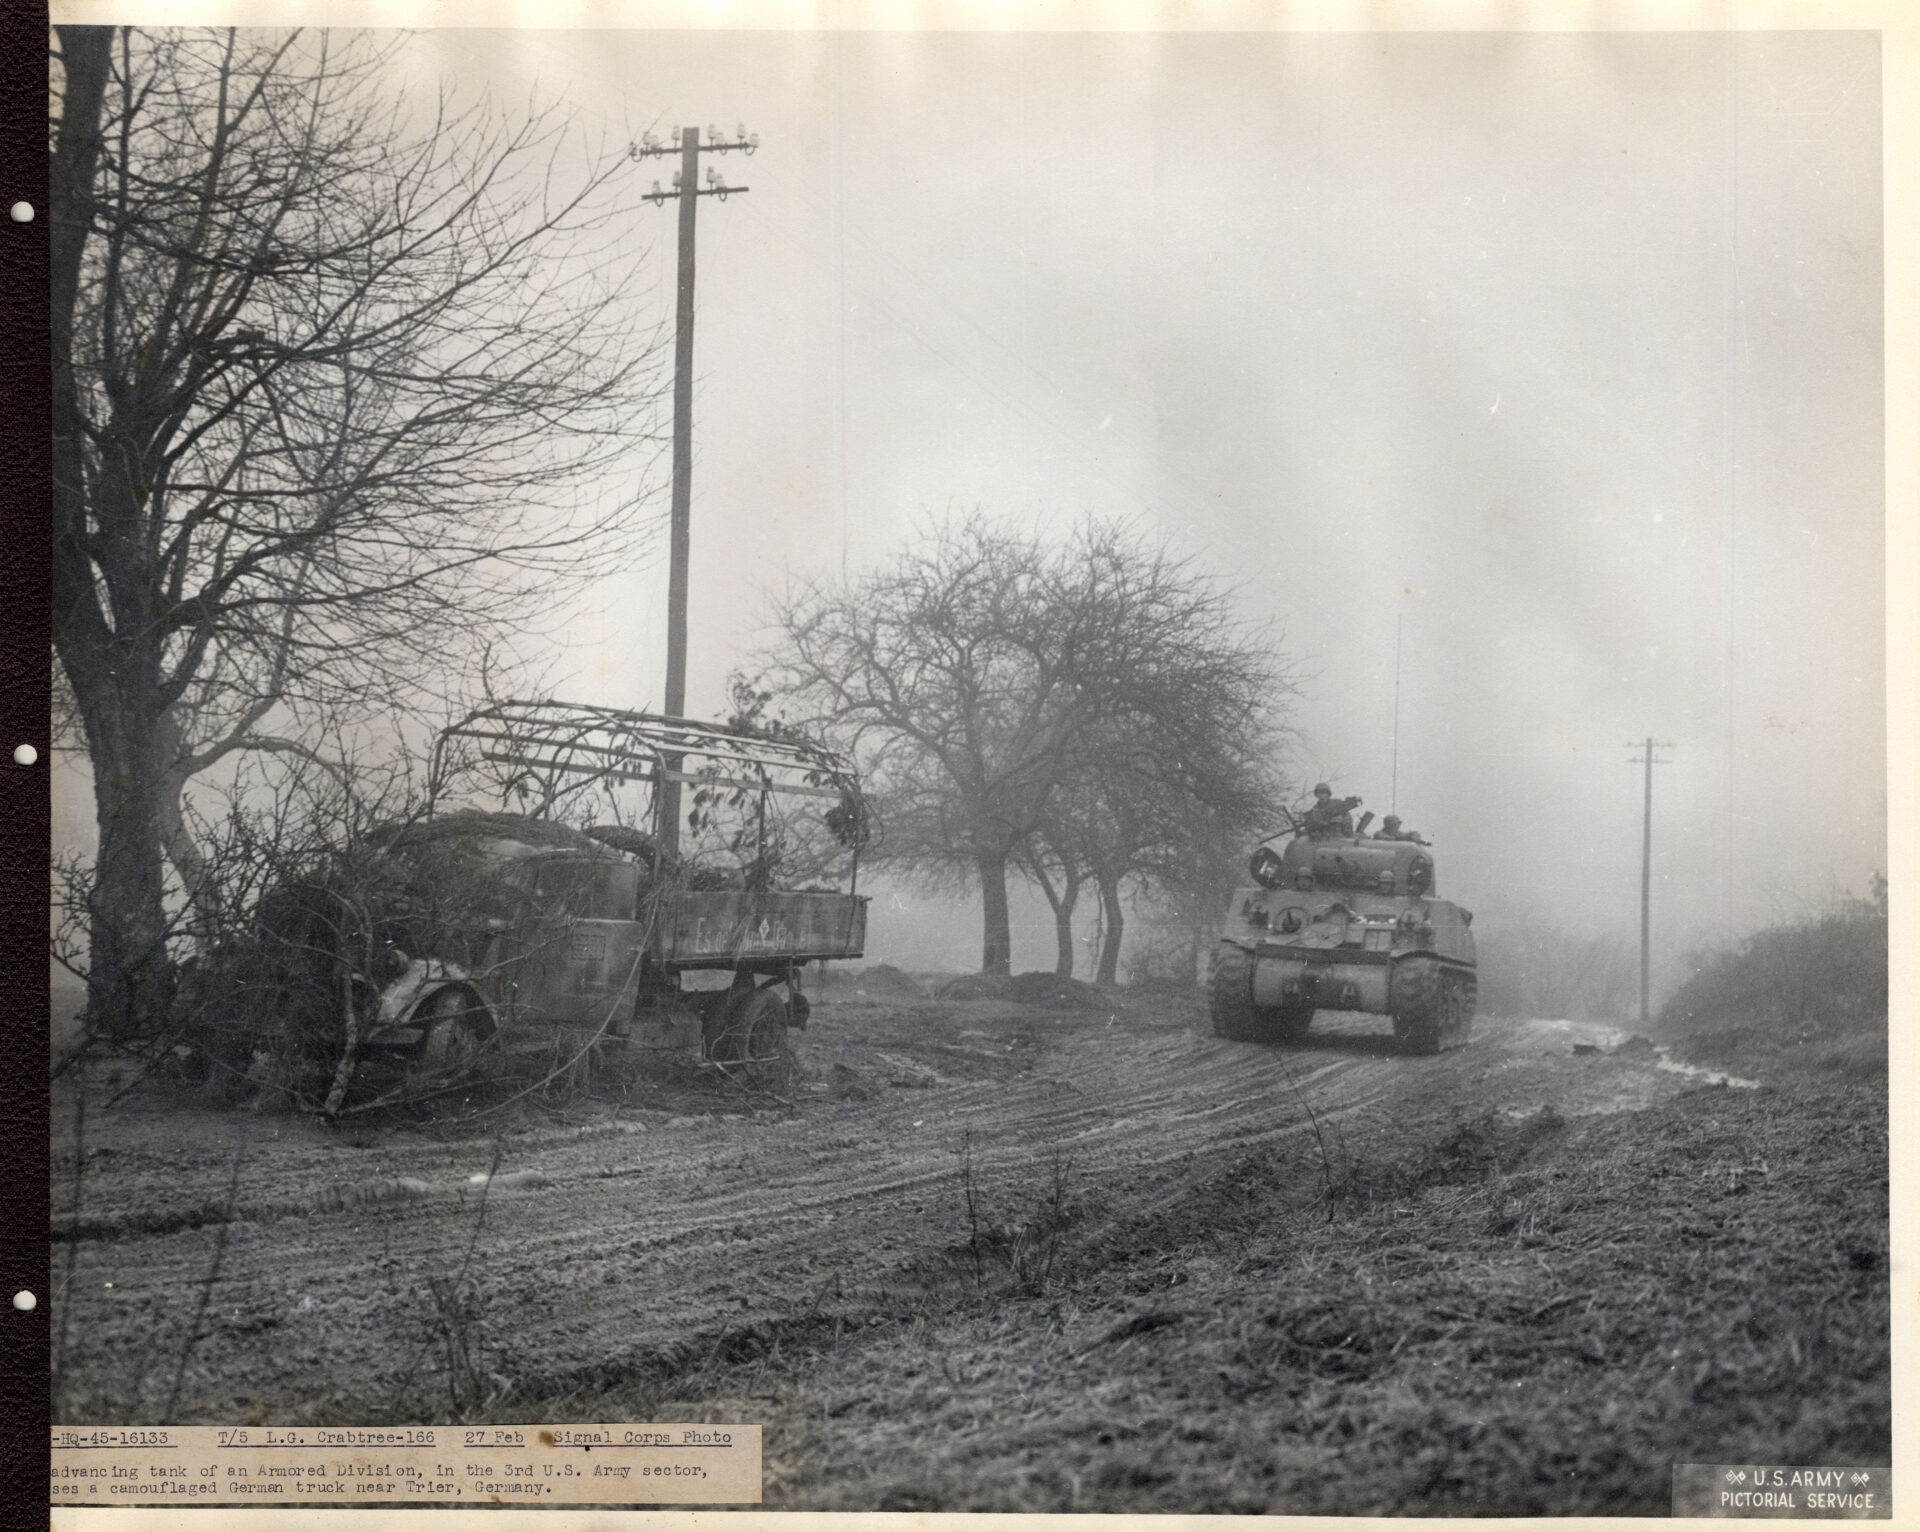 Tanks of armored division passing through German roads